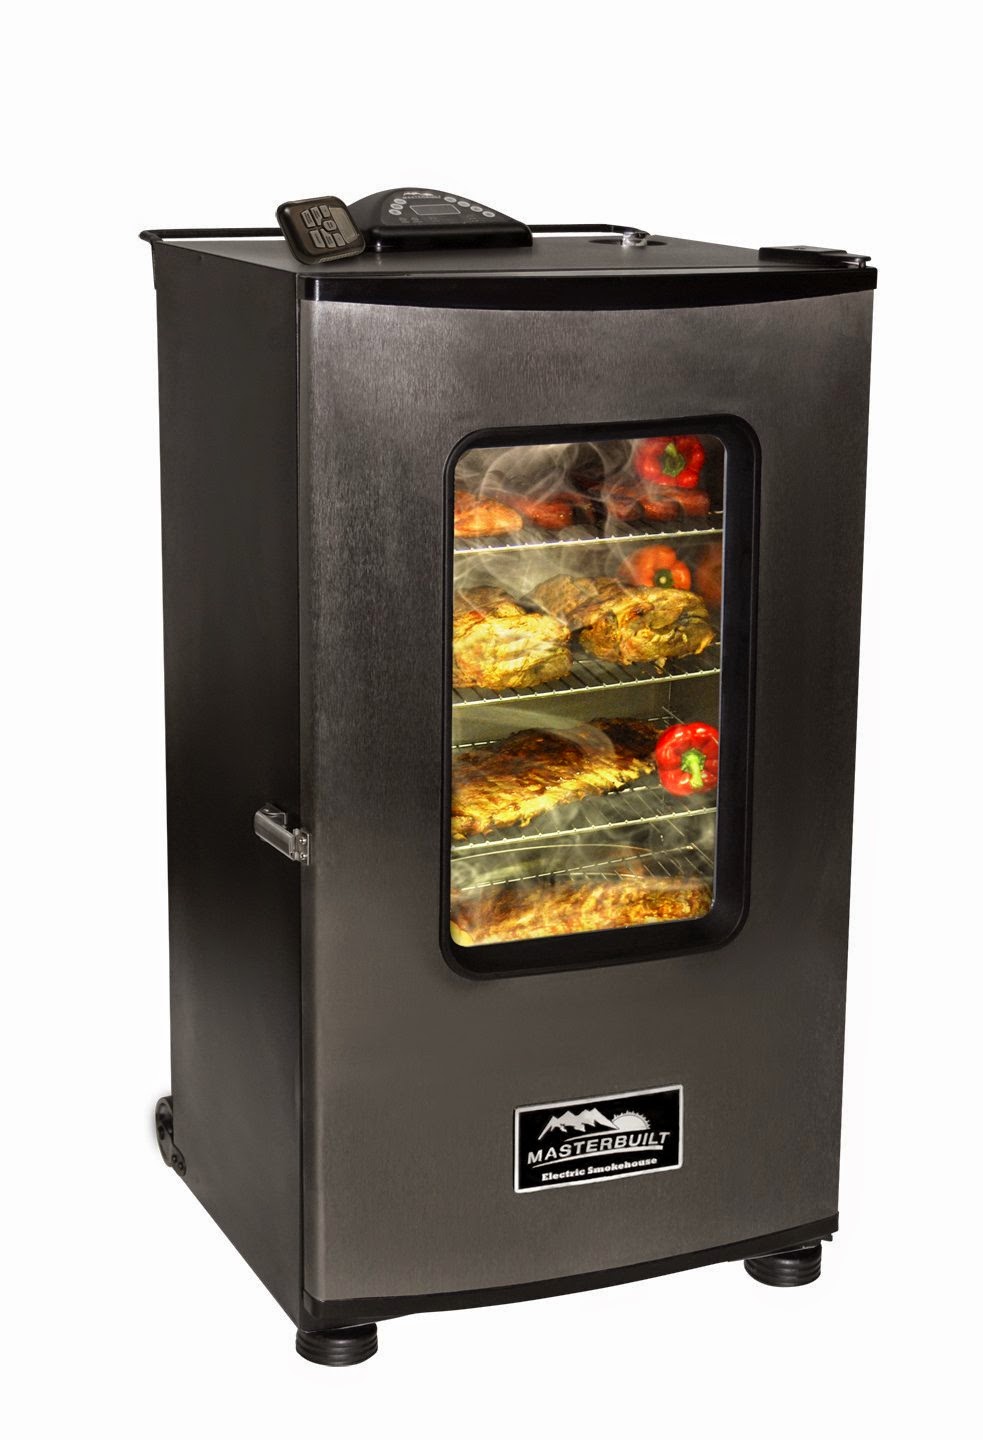 Masterbuilt 20070411 30" electric smoker with viewing window and RF controller, review and compare with 20070910 and 20070512